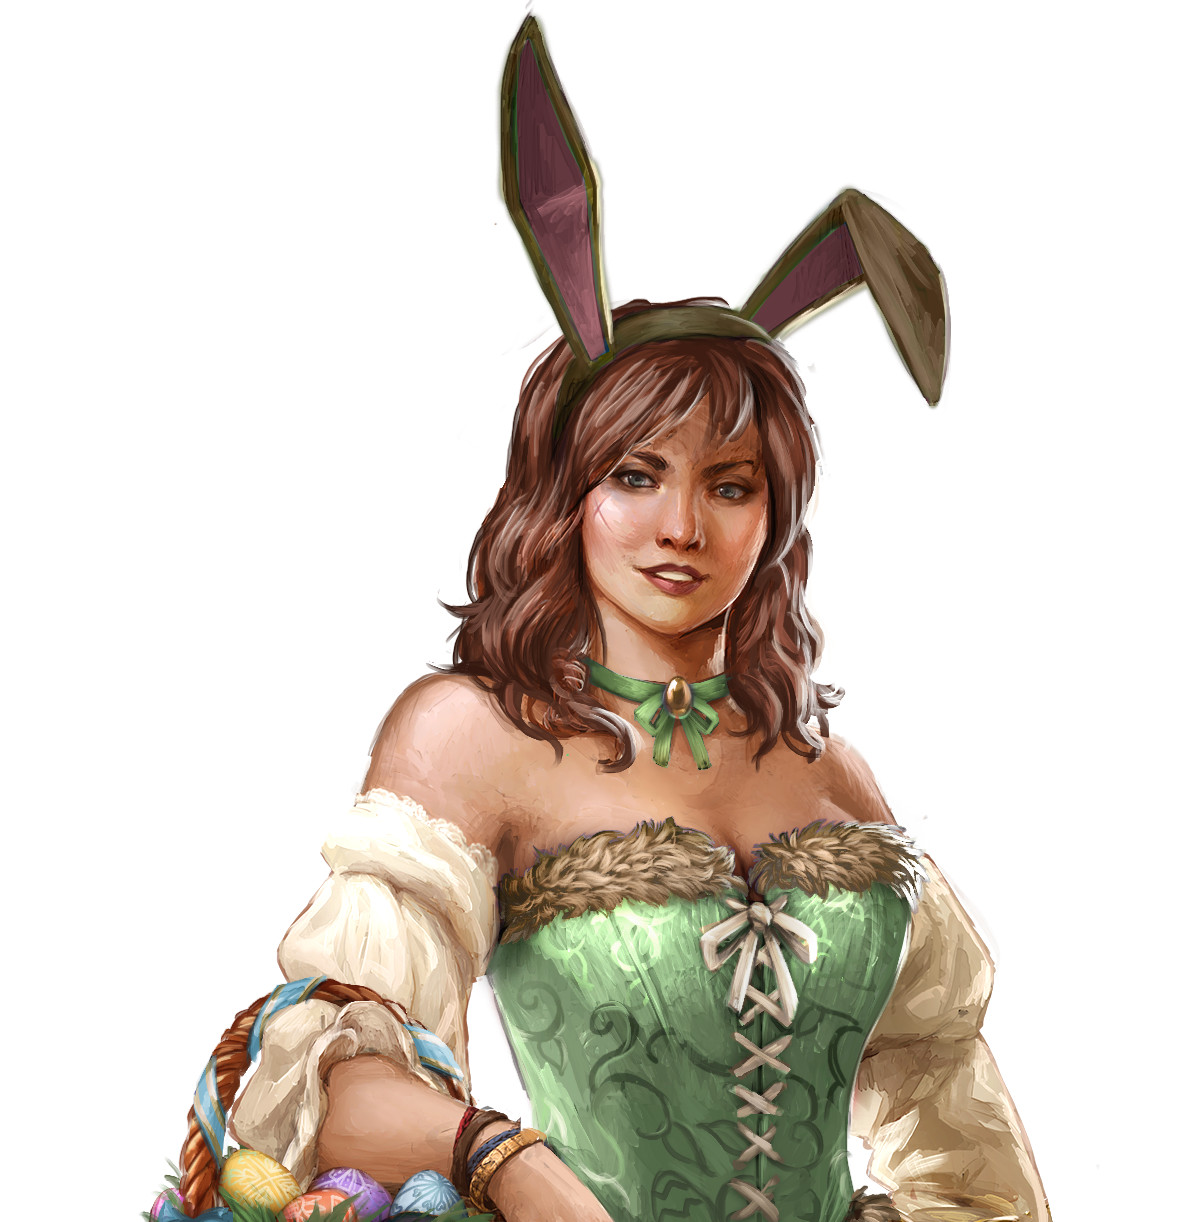 Bunny girl NPC who gives the event quests in 'Ships of Battle: Age of Pirates'